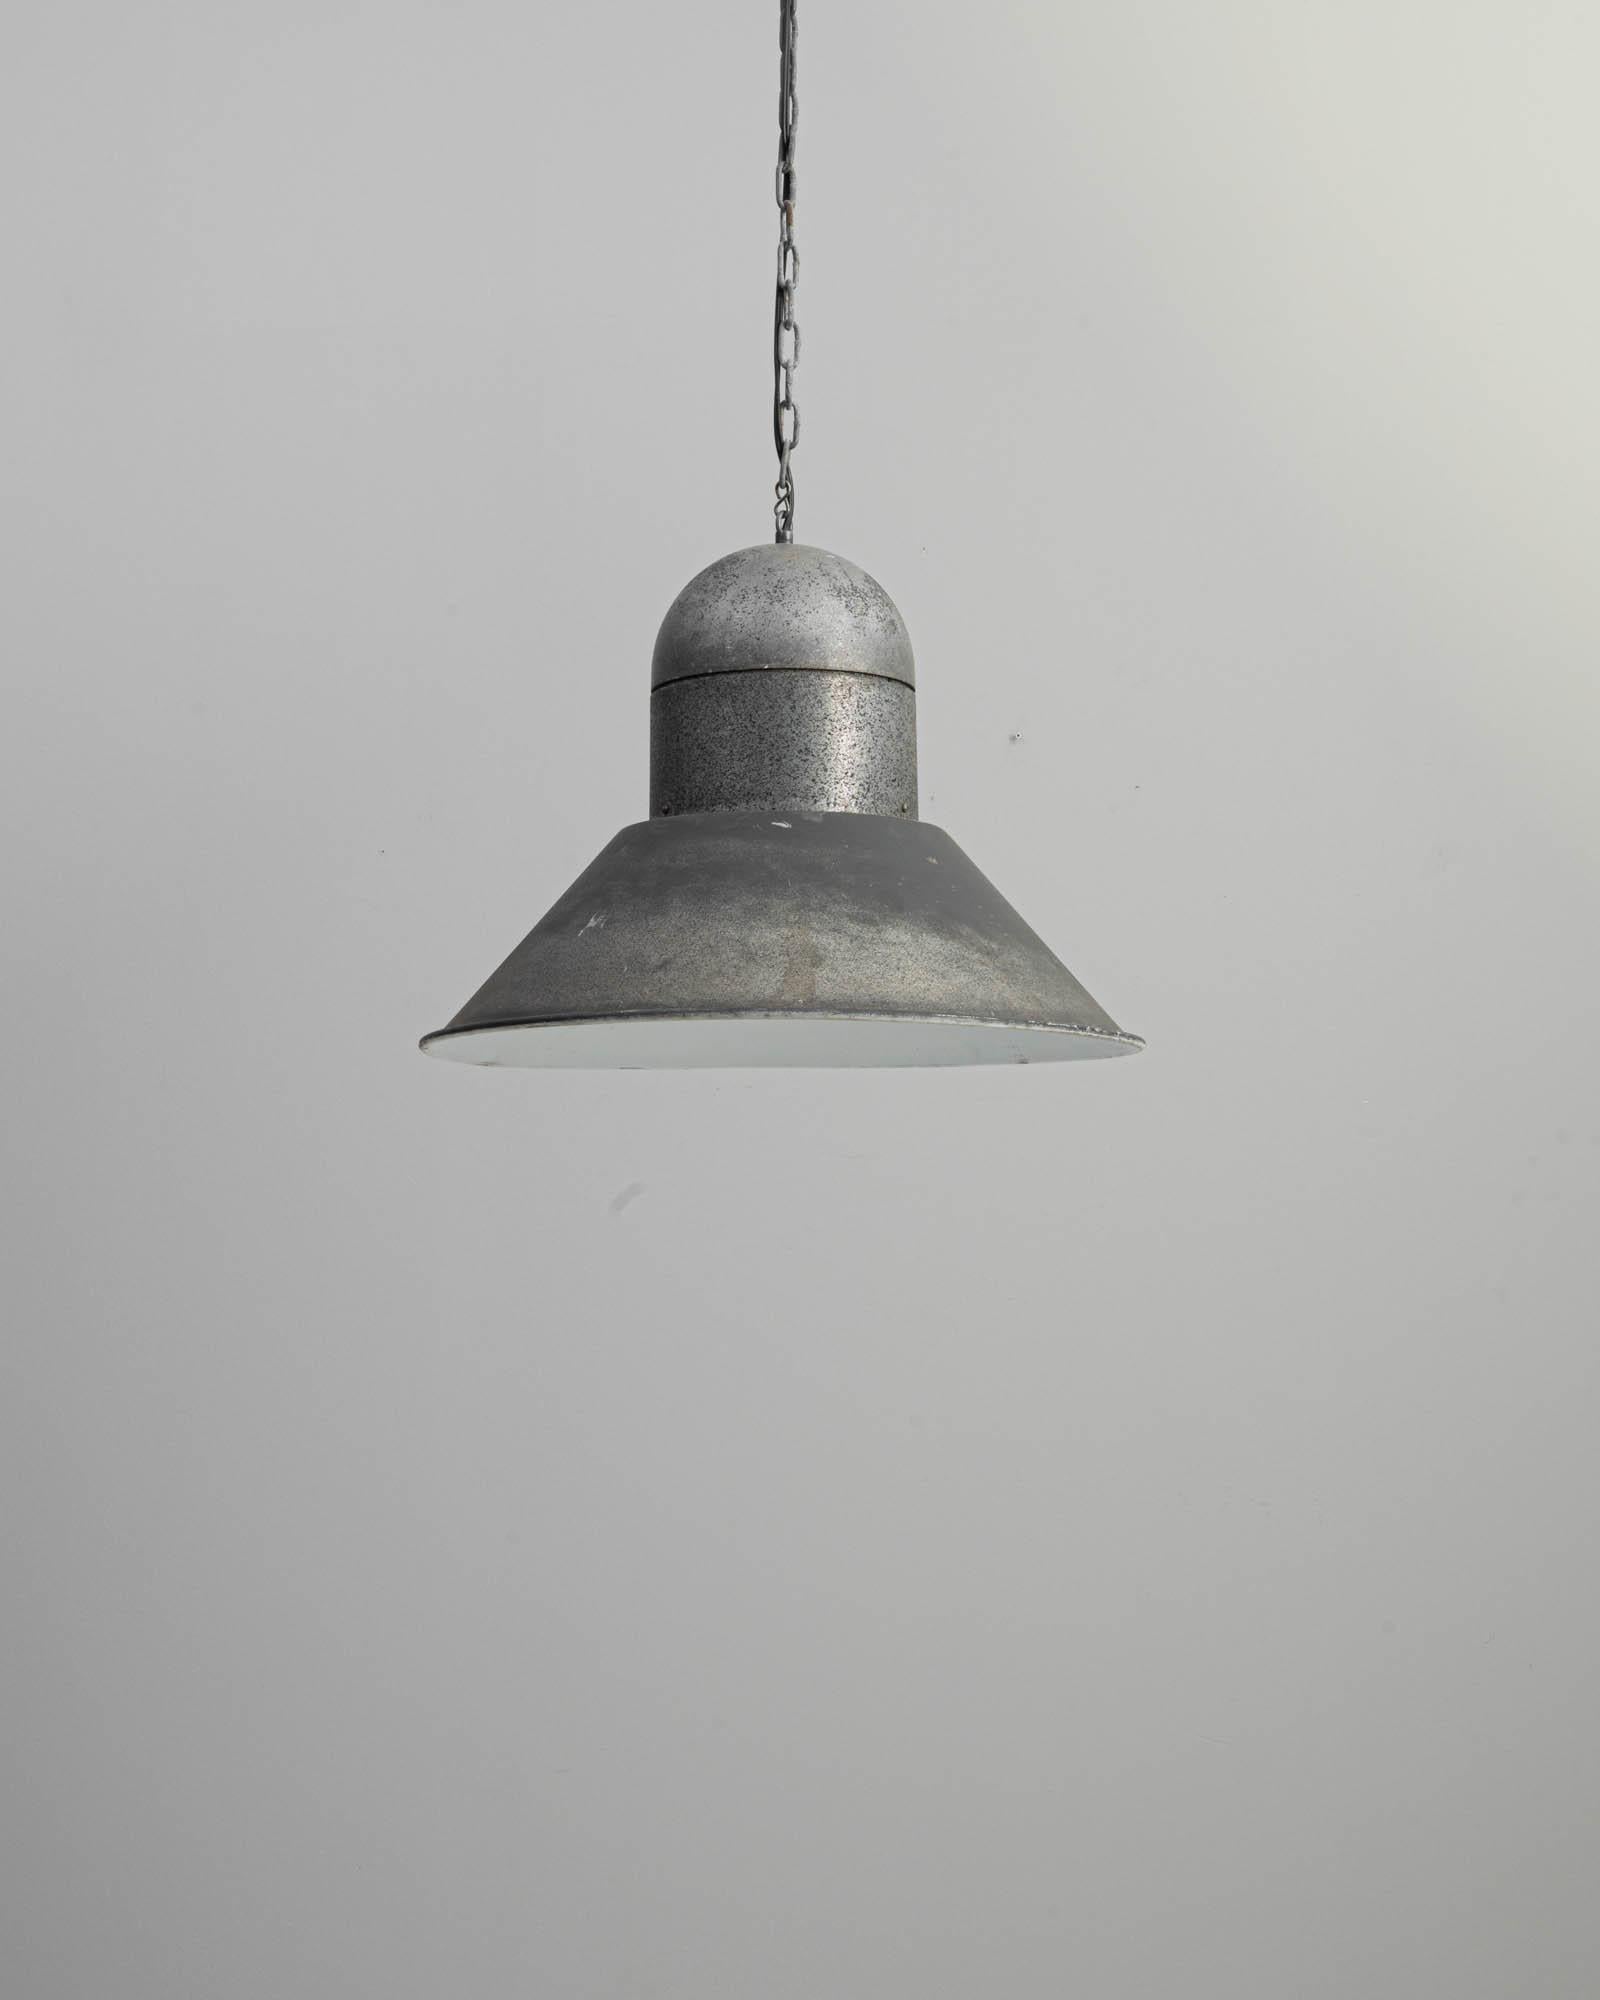 The simple, graphic form of this vintage pendant lamp makes it an Industrial find to treasure. Made in Central Europe in the 20th century, the streamlined dome of the pendant holder is counterbalanced by the wide flare of the circular shade. The